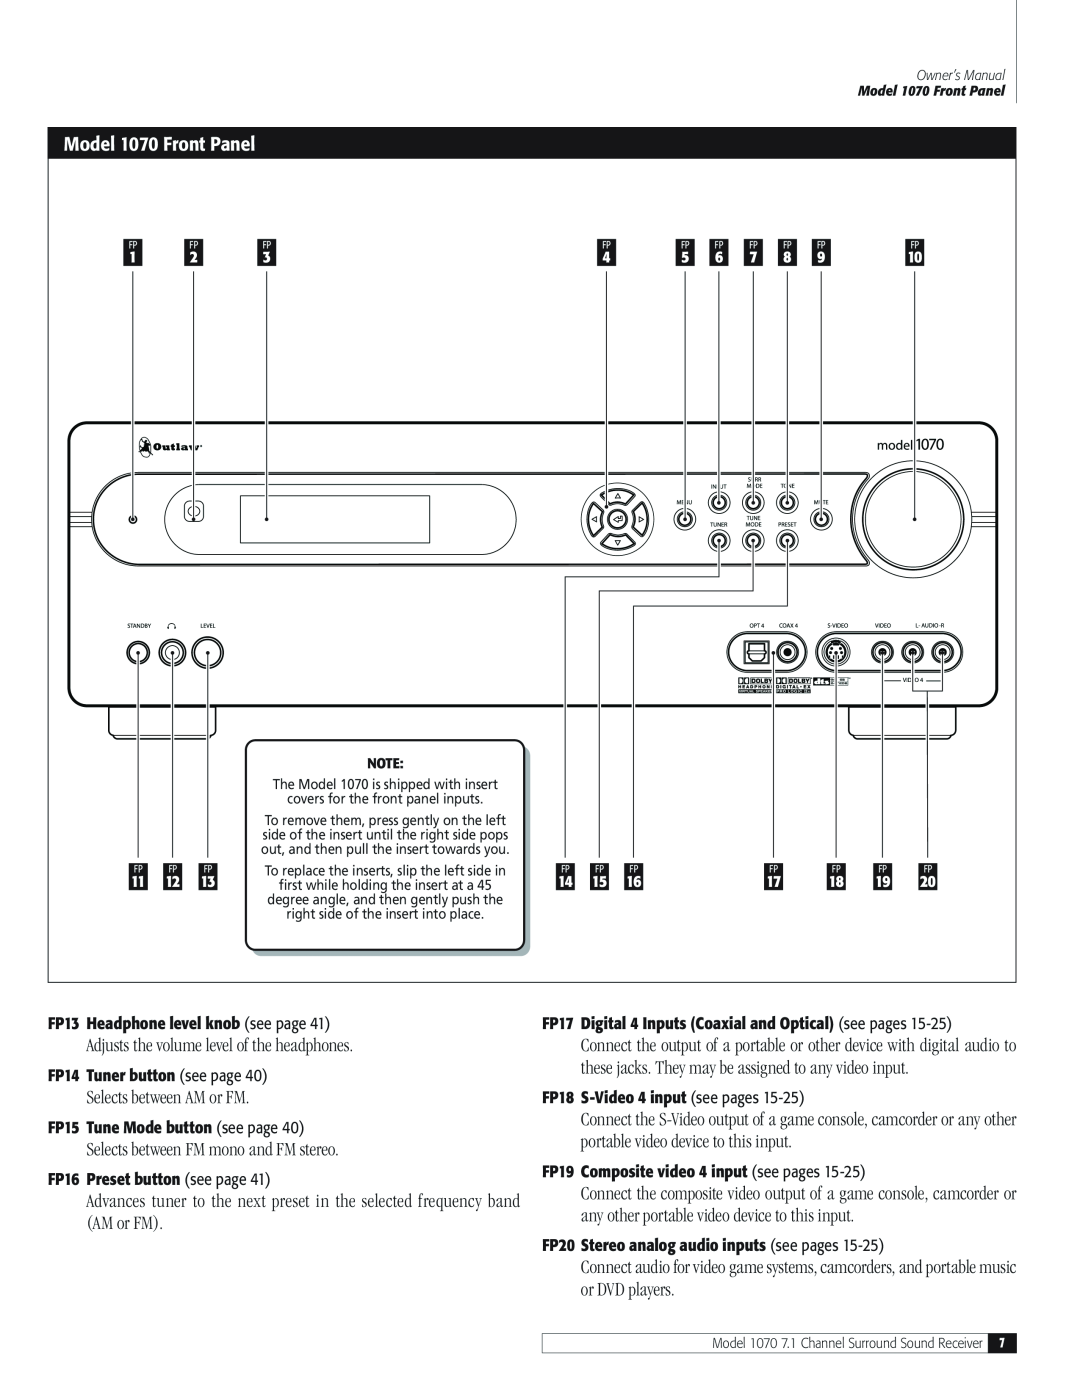 Outlaw Audio owner manual Model 1070 Front Panel, Adjusts the volume level of the headphones, Selects between AM or FM 